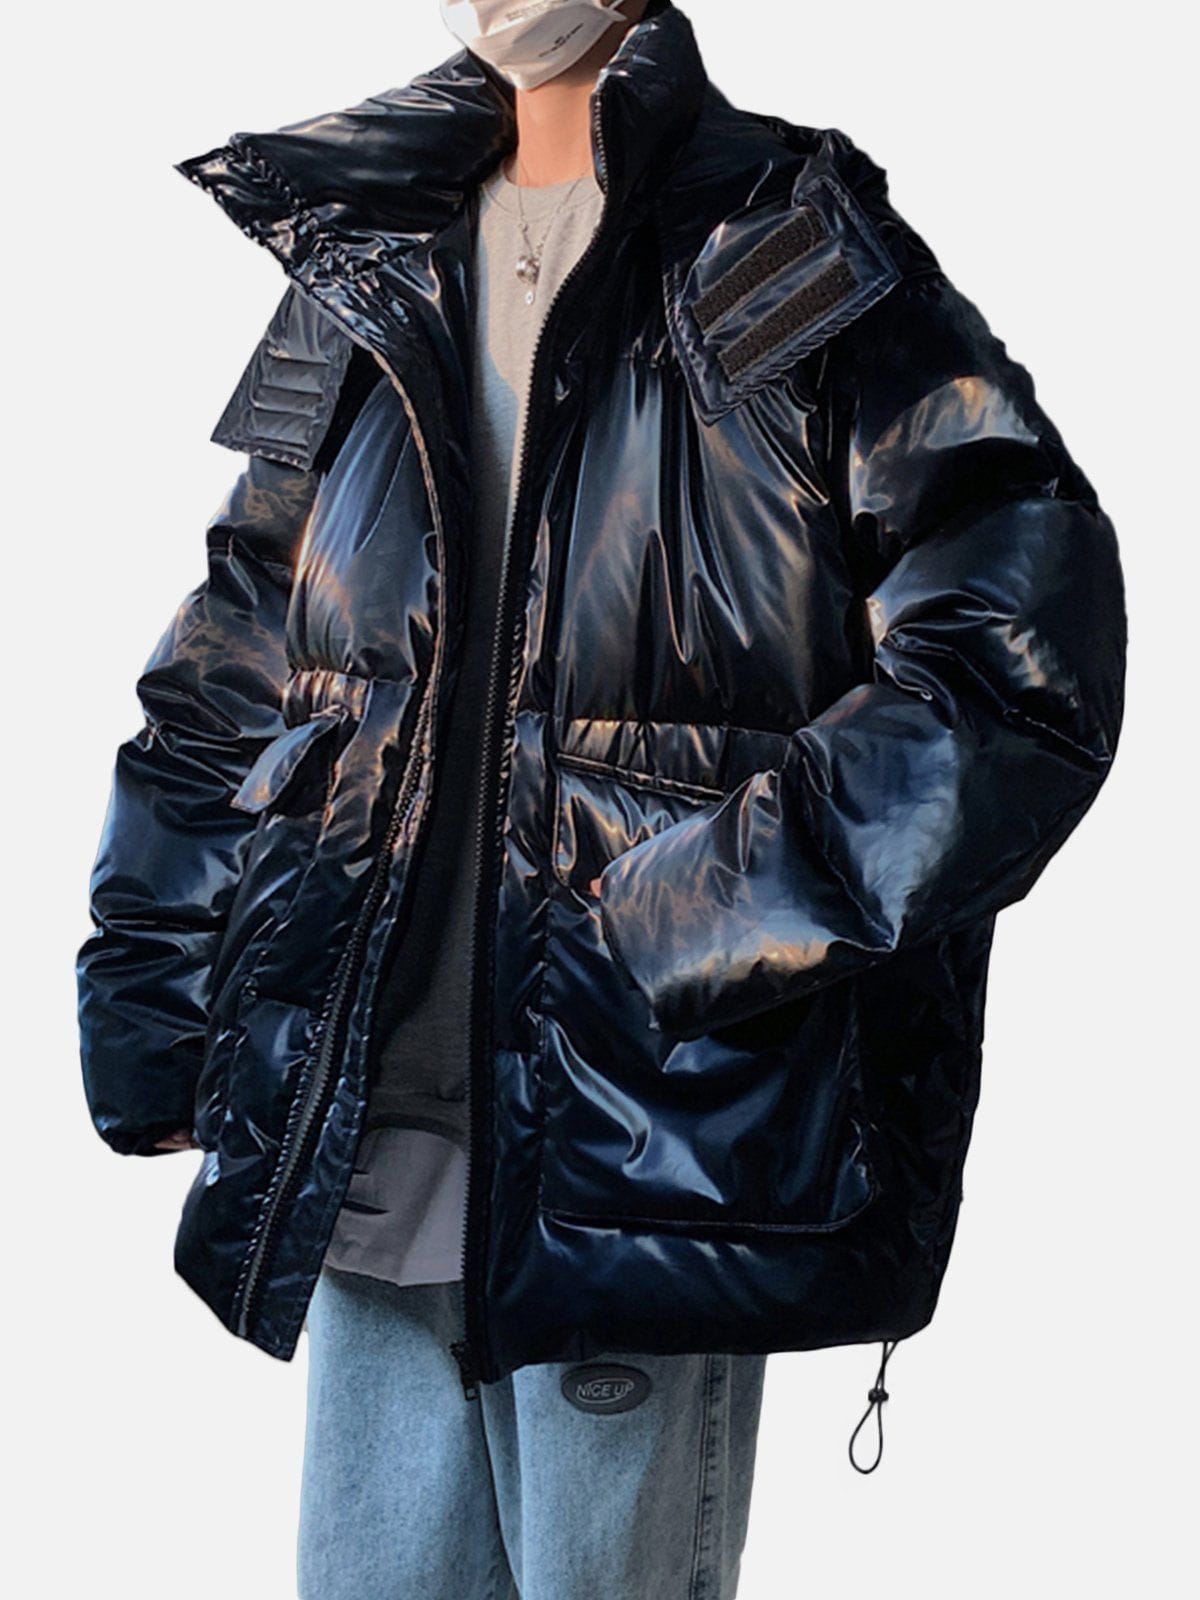 Majesda® - Glossy Removable Sleeves Winter Coat outfit ideas streetwear fashion